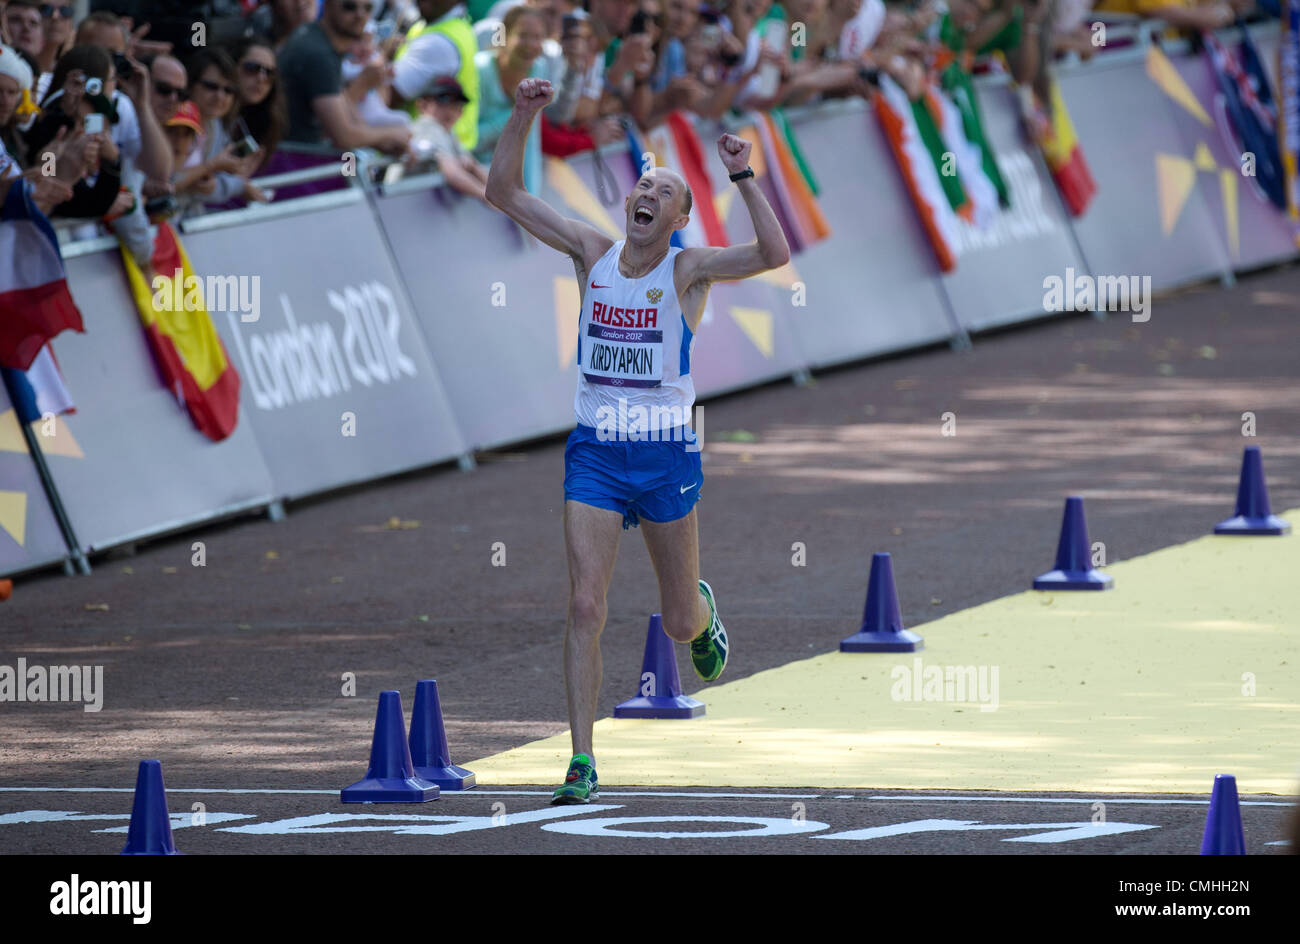 11.08.2012. London England.  Goldmedalist Sergey Kirdyapkin of Russia celebrates after winning the Men's 50km Race Walk final as part of the London 2012 Olympic Games Athletics, Track and Field events at the London 2012 Olympic Games, London, Great Britain, 11 August 2012. Stock Photo